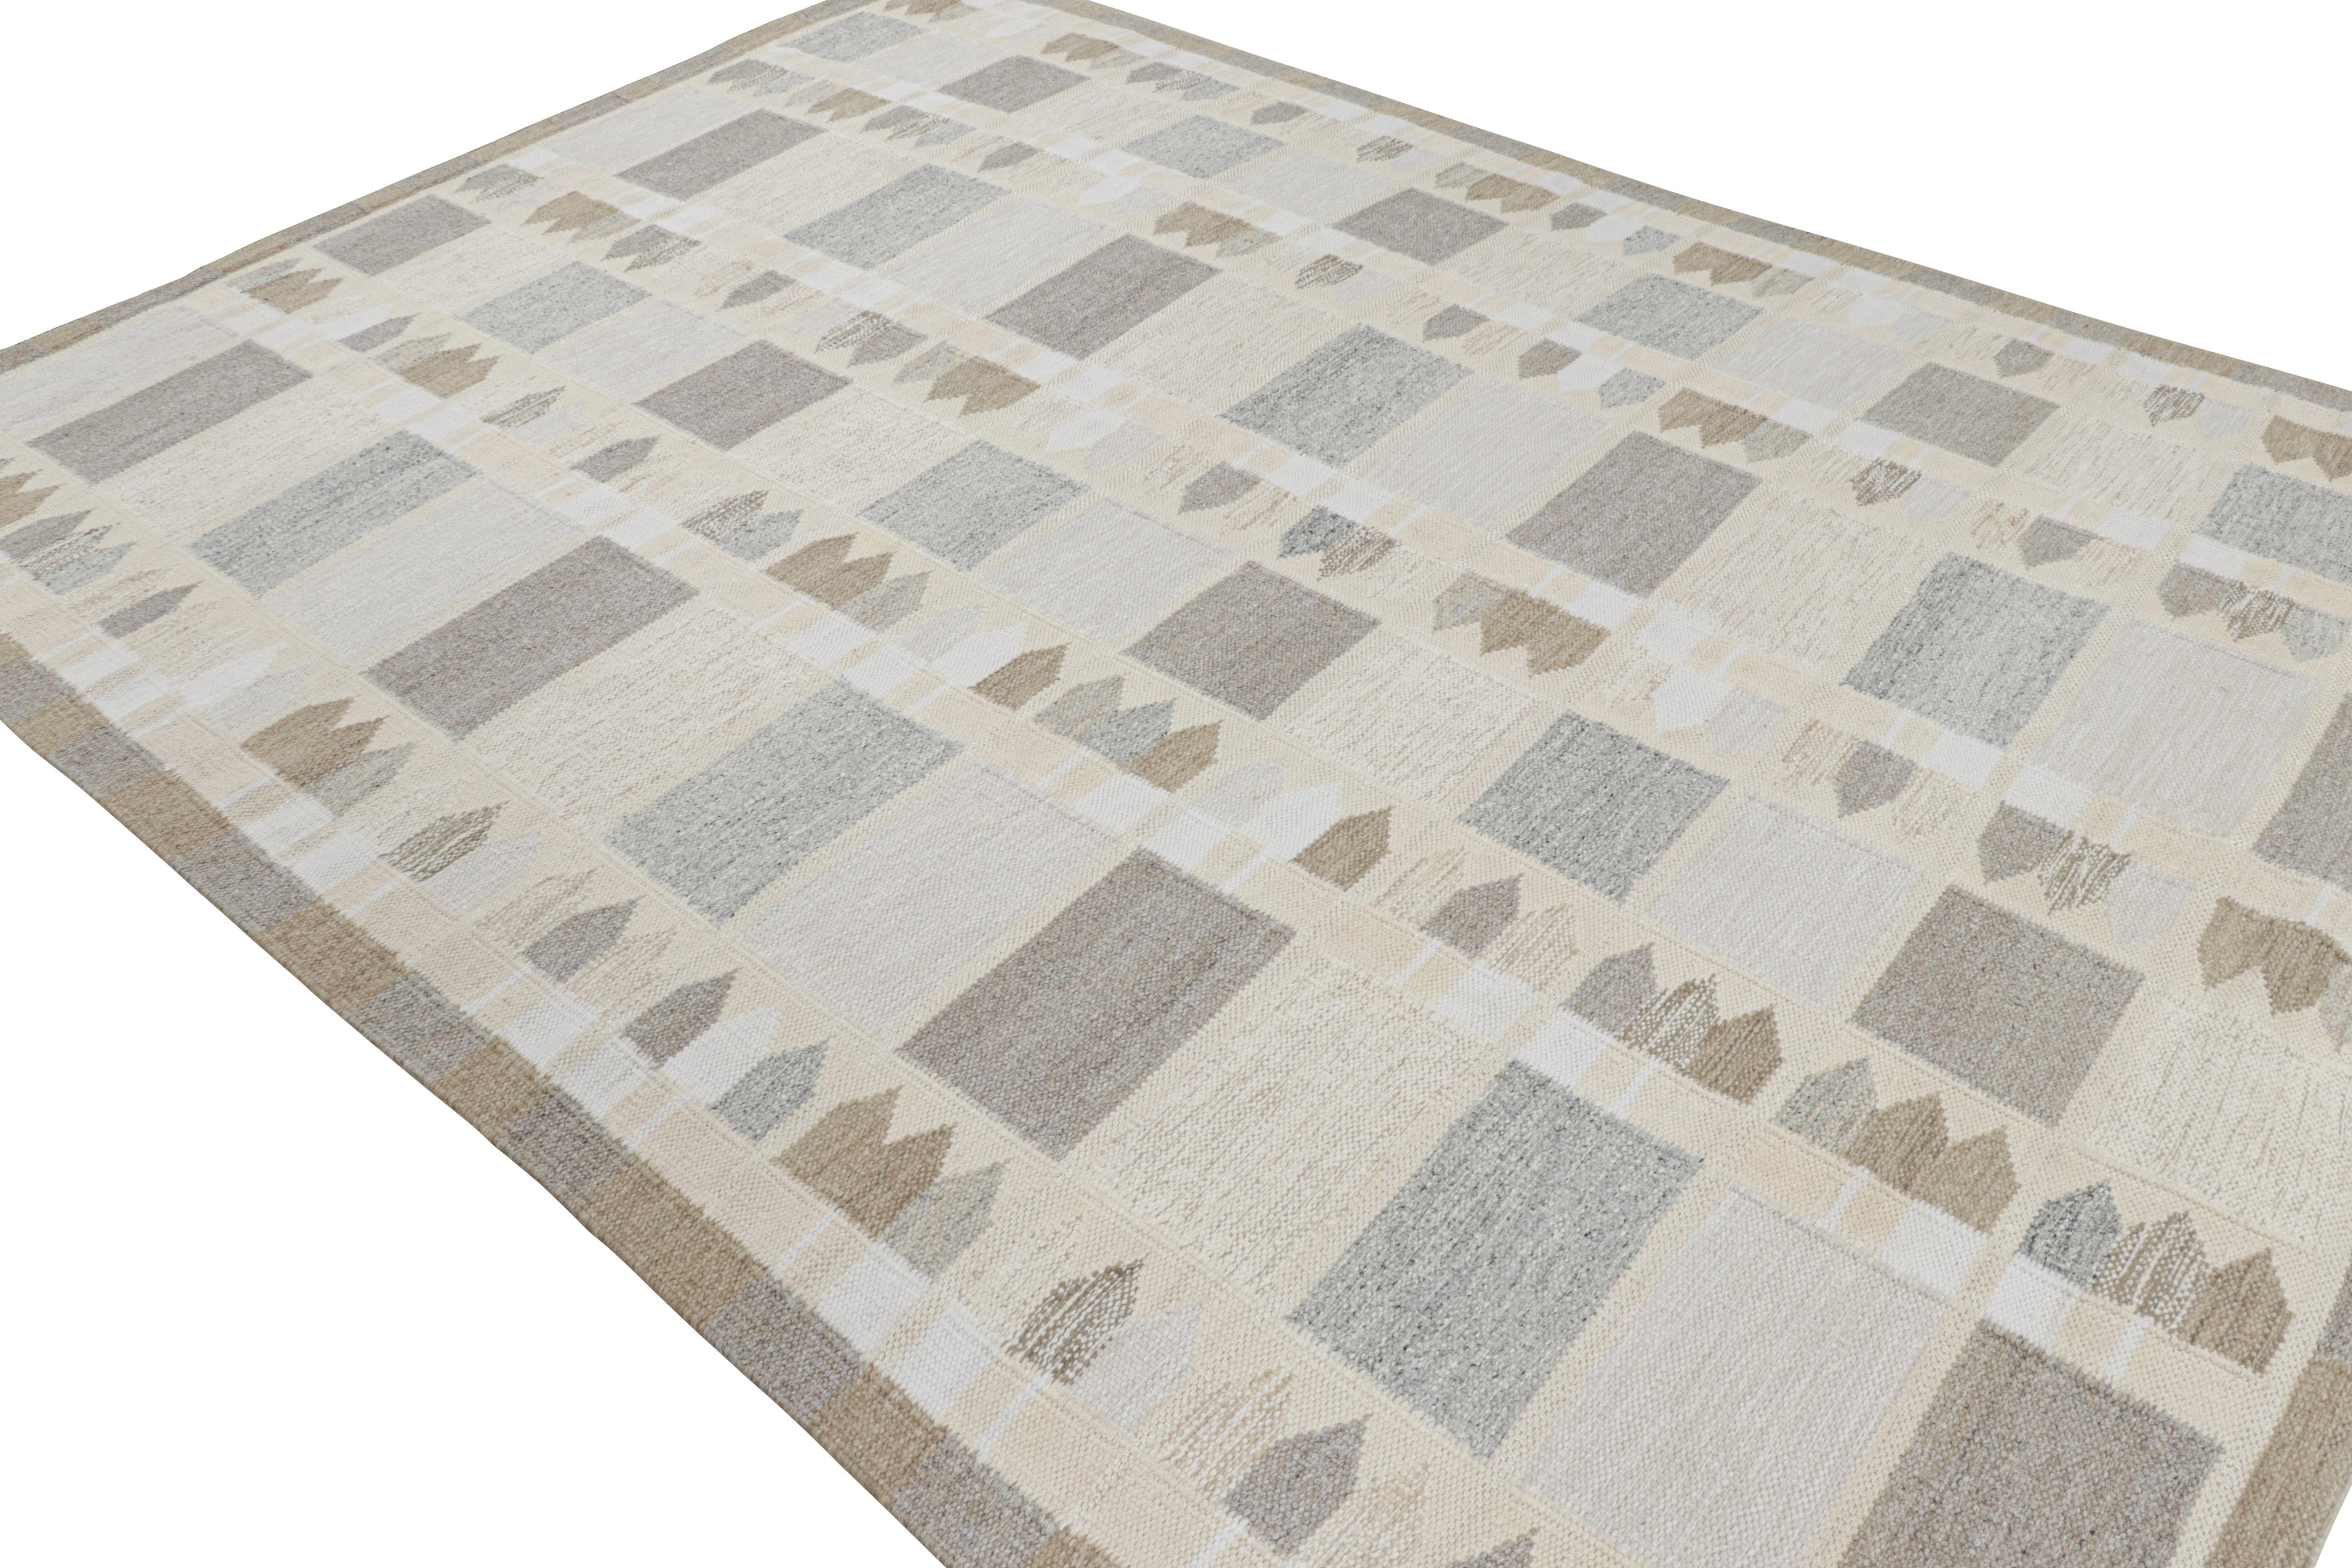 Indian Rug & Kilim’s Scandinavian Style Deco Rug in Beige-Brown with Geometric Patterns For Sale